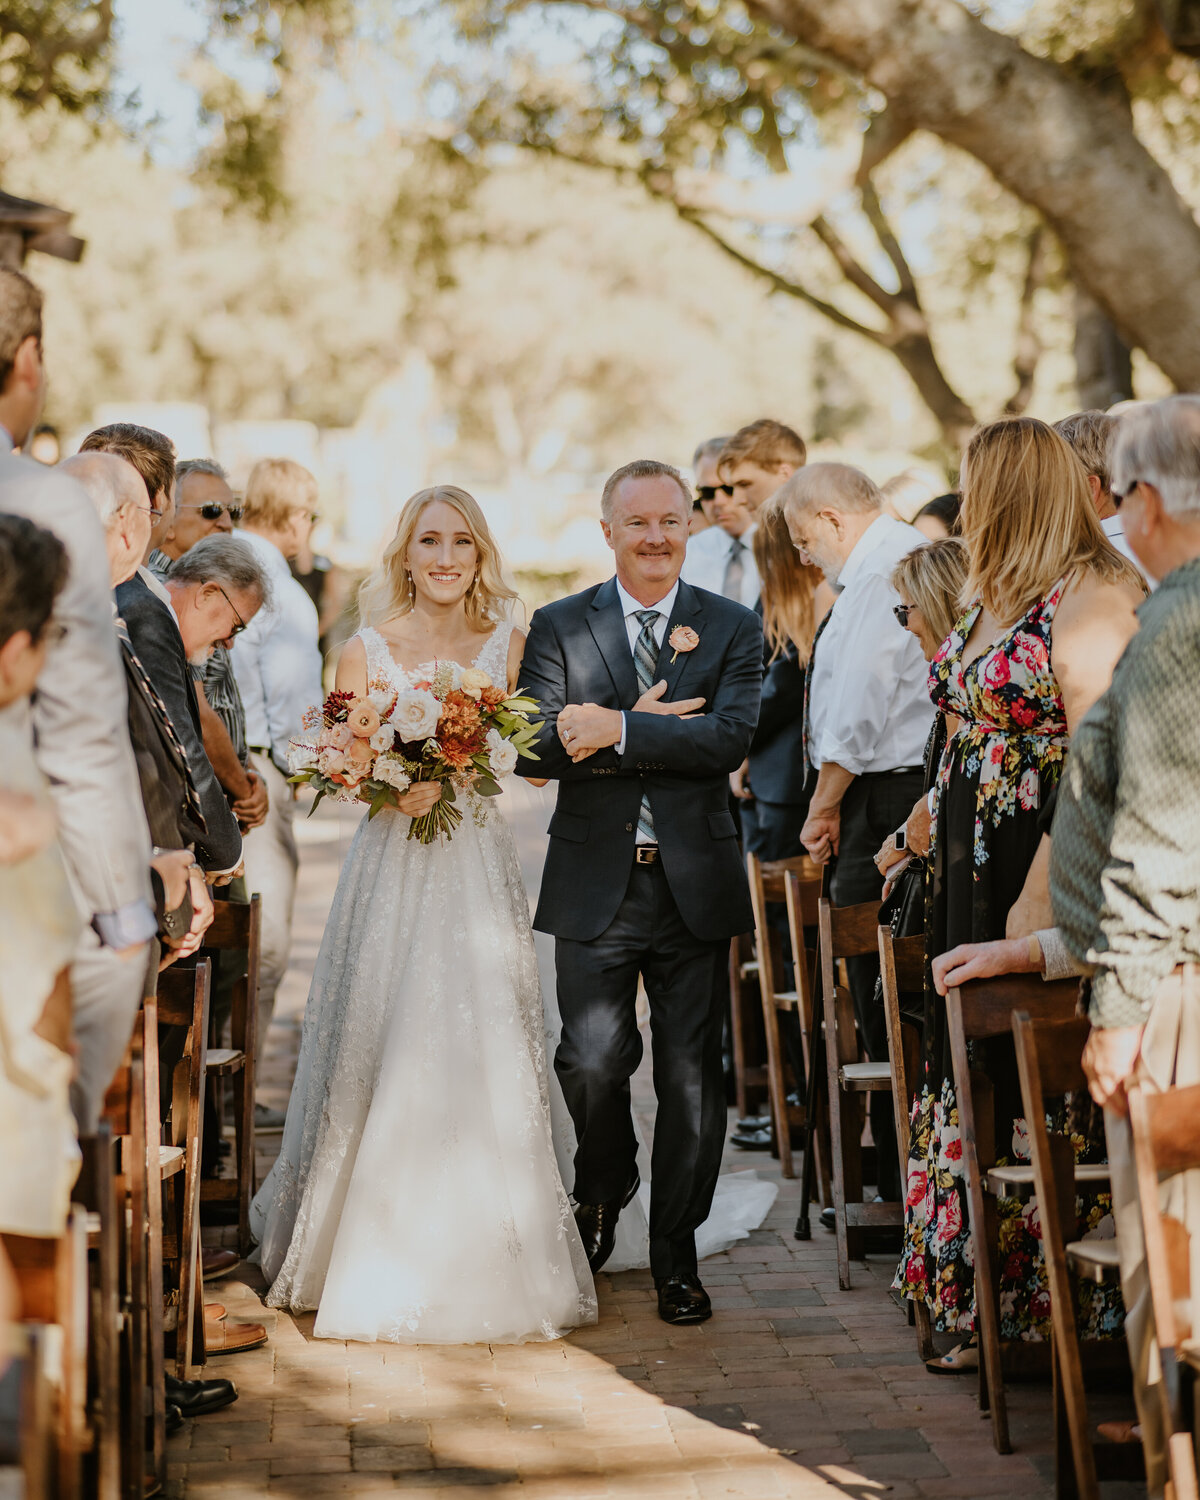 Bride and her father walking down the aisle on wedding day Temecula, California Wedding photographer Yescphotography